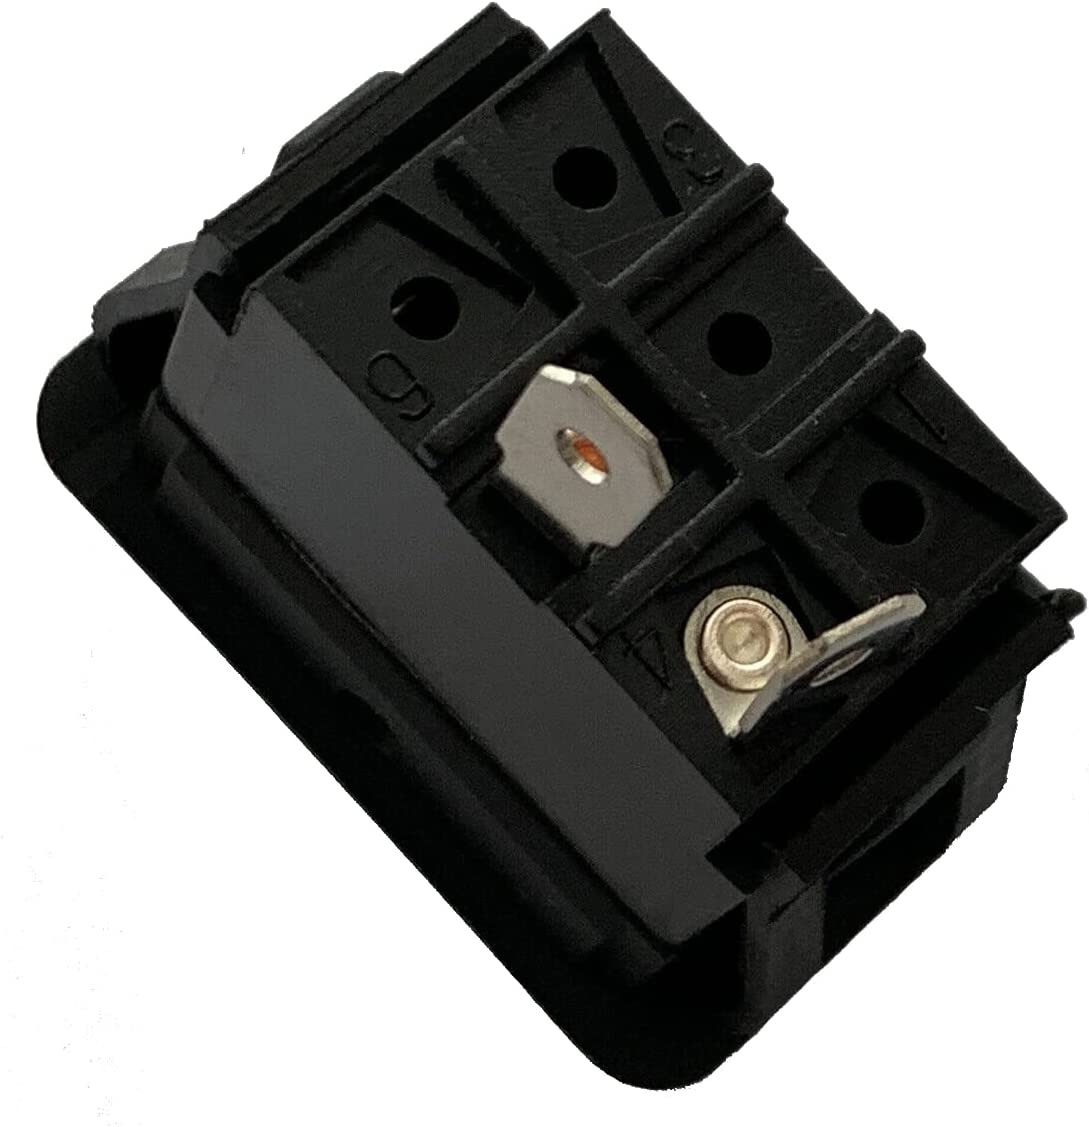 6675999 Wiper Switch Compatible with Bobcat 553 753 873 963 S150 S175 S590 S750 T190 T300